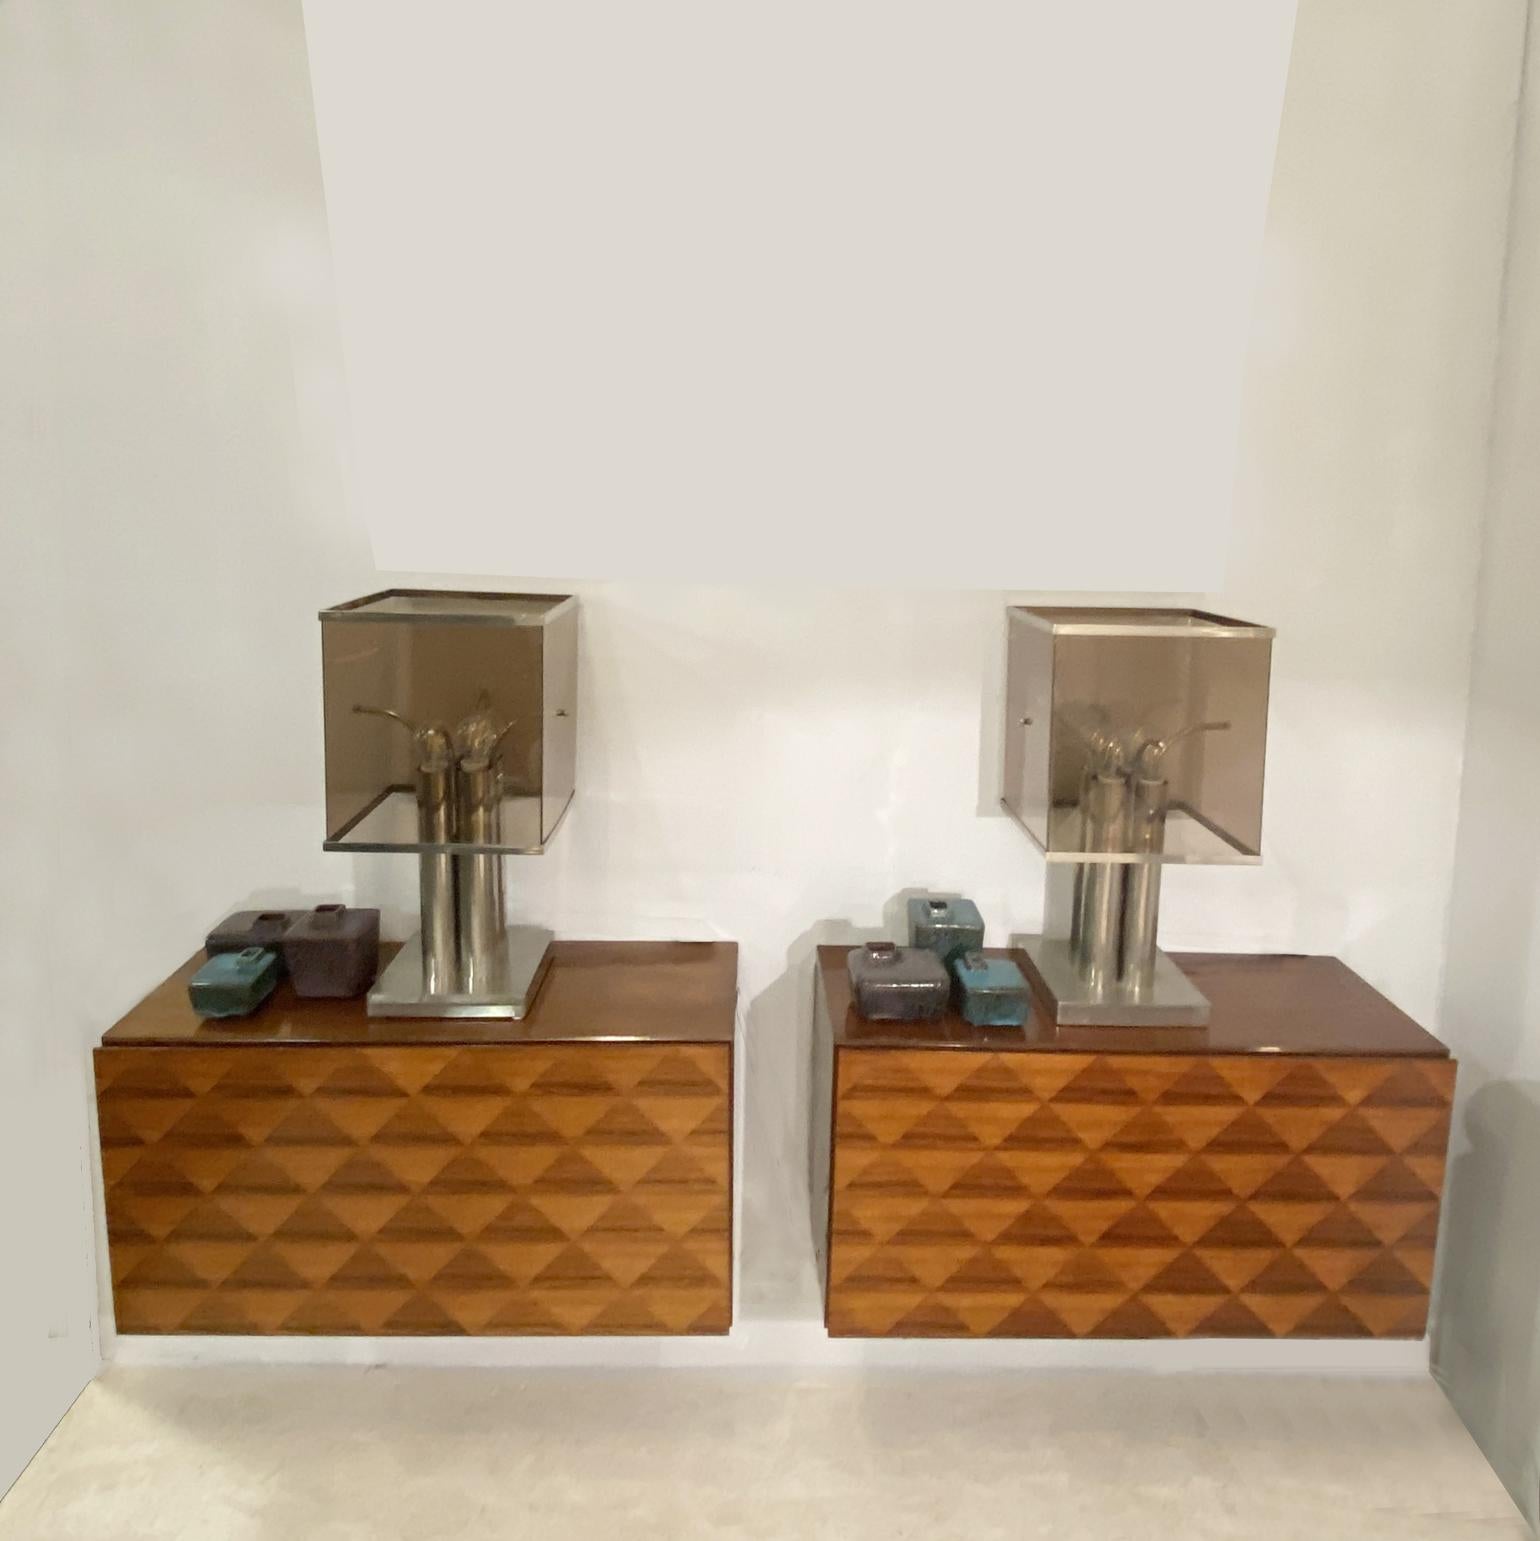 A pair of Mid Century Modern wall hung cabinets by Franz Meyer Mobel, Germany, dated 1968. Both cabinets are veneered with multiple diamond shape designs on the front doors in hardwood veneer.
Very good vintage condition, with the original label